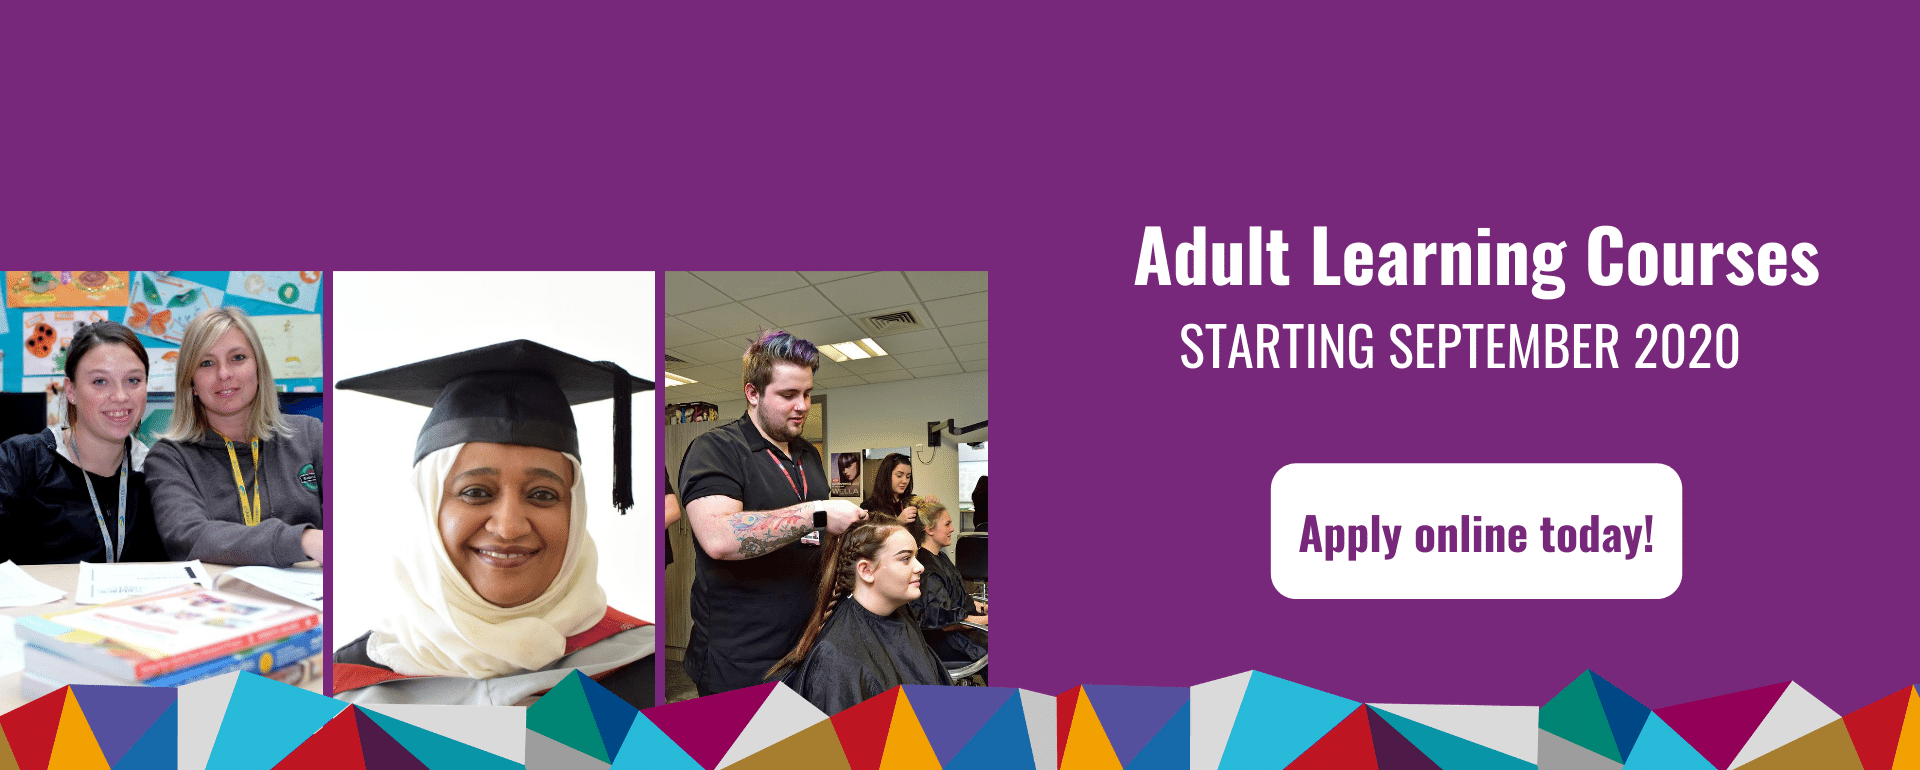 Wirral Met offers a wide range of courses for adults looking to improve their career prospects or learn a new skill, from Entry Level to Higher Education.